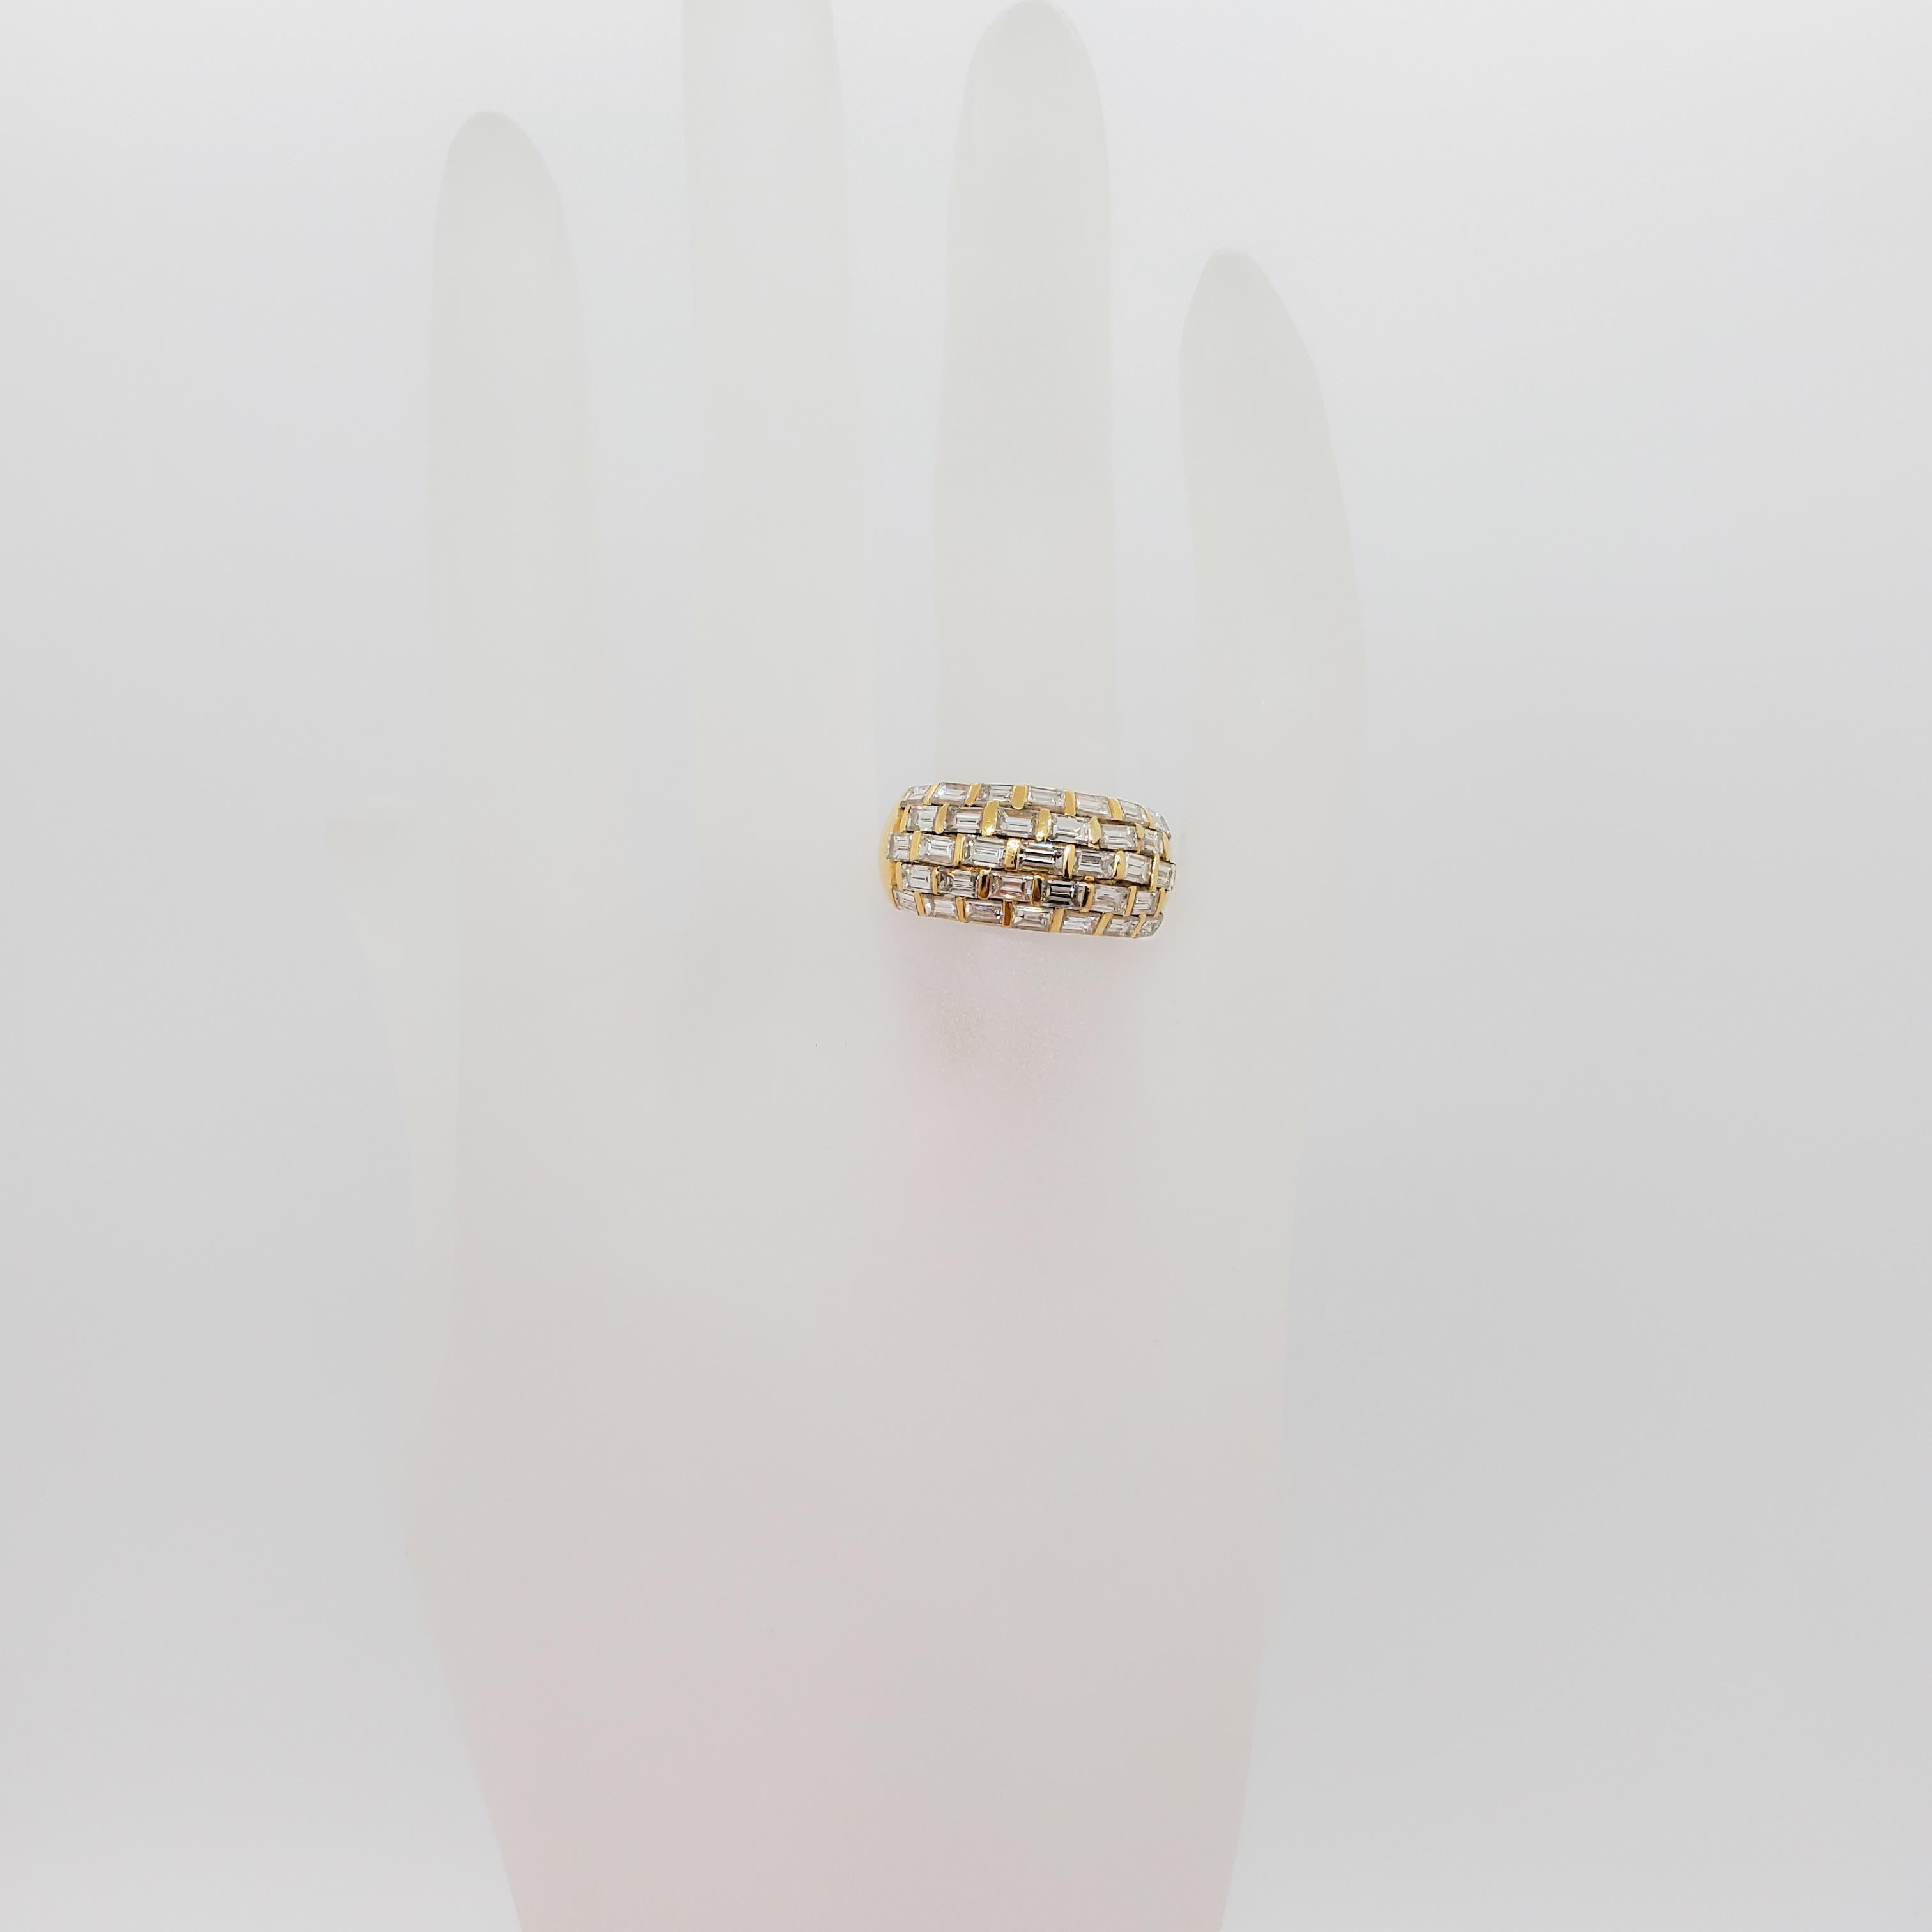 Baguette Cut Estate White Diamond Baguette Band Ring in 18k Yellow Gold